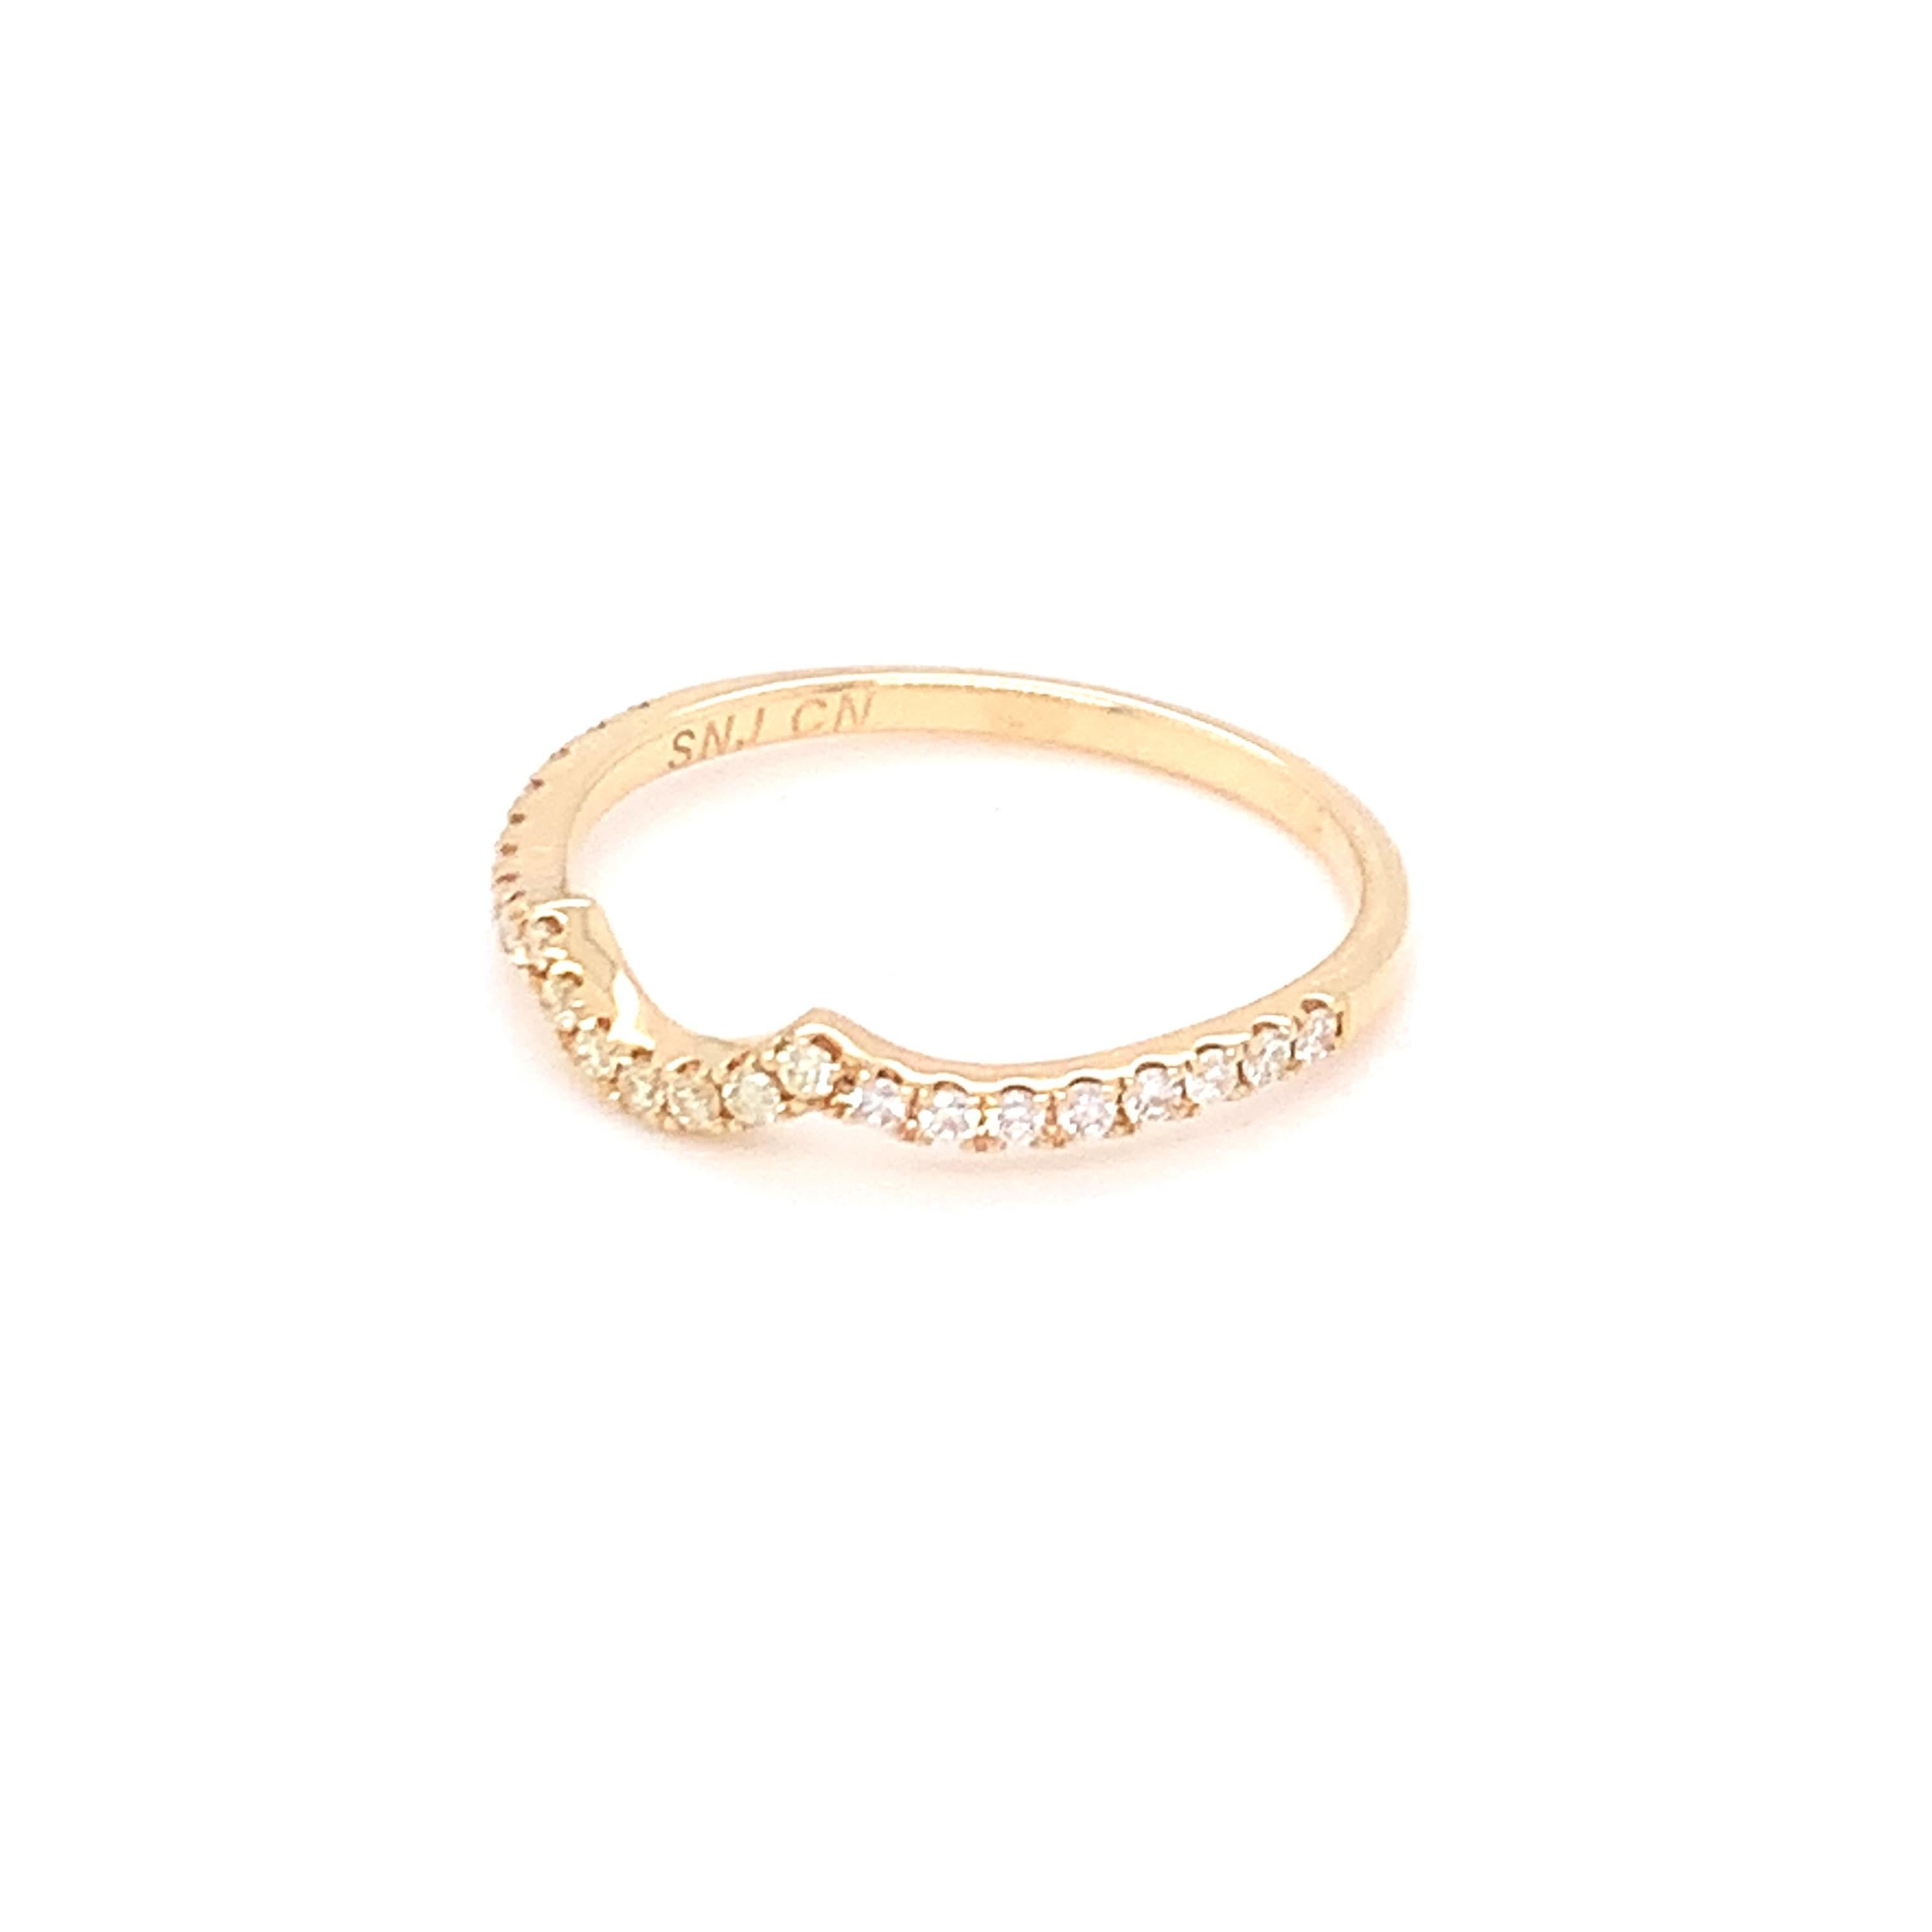 A perfect blend of yellow and white diamonds in a single makes this band suitable for a everyday wear. Set in yellow gold and carefully finished with skilled hands.
Yellow Diamond: 0.05ct
White Diamond: 0.13ct
Gold: 14K Yellow
Ring Size:7